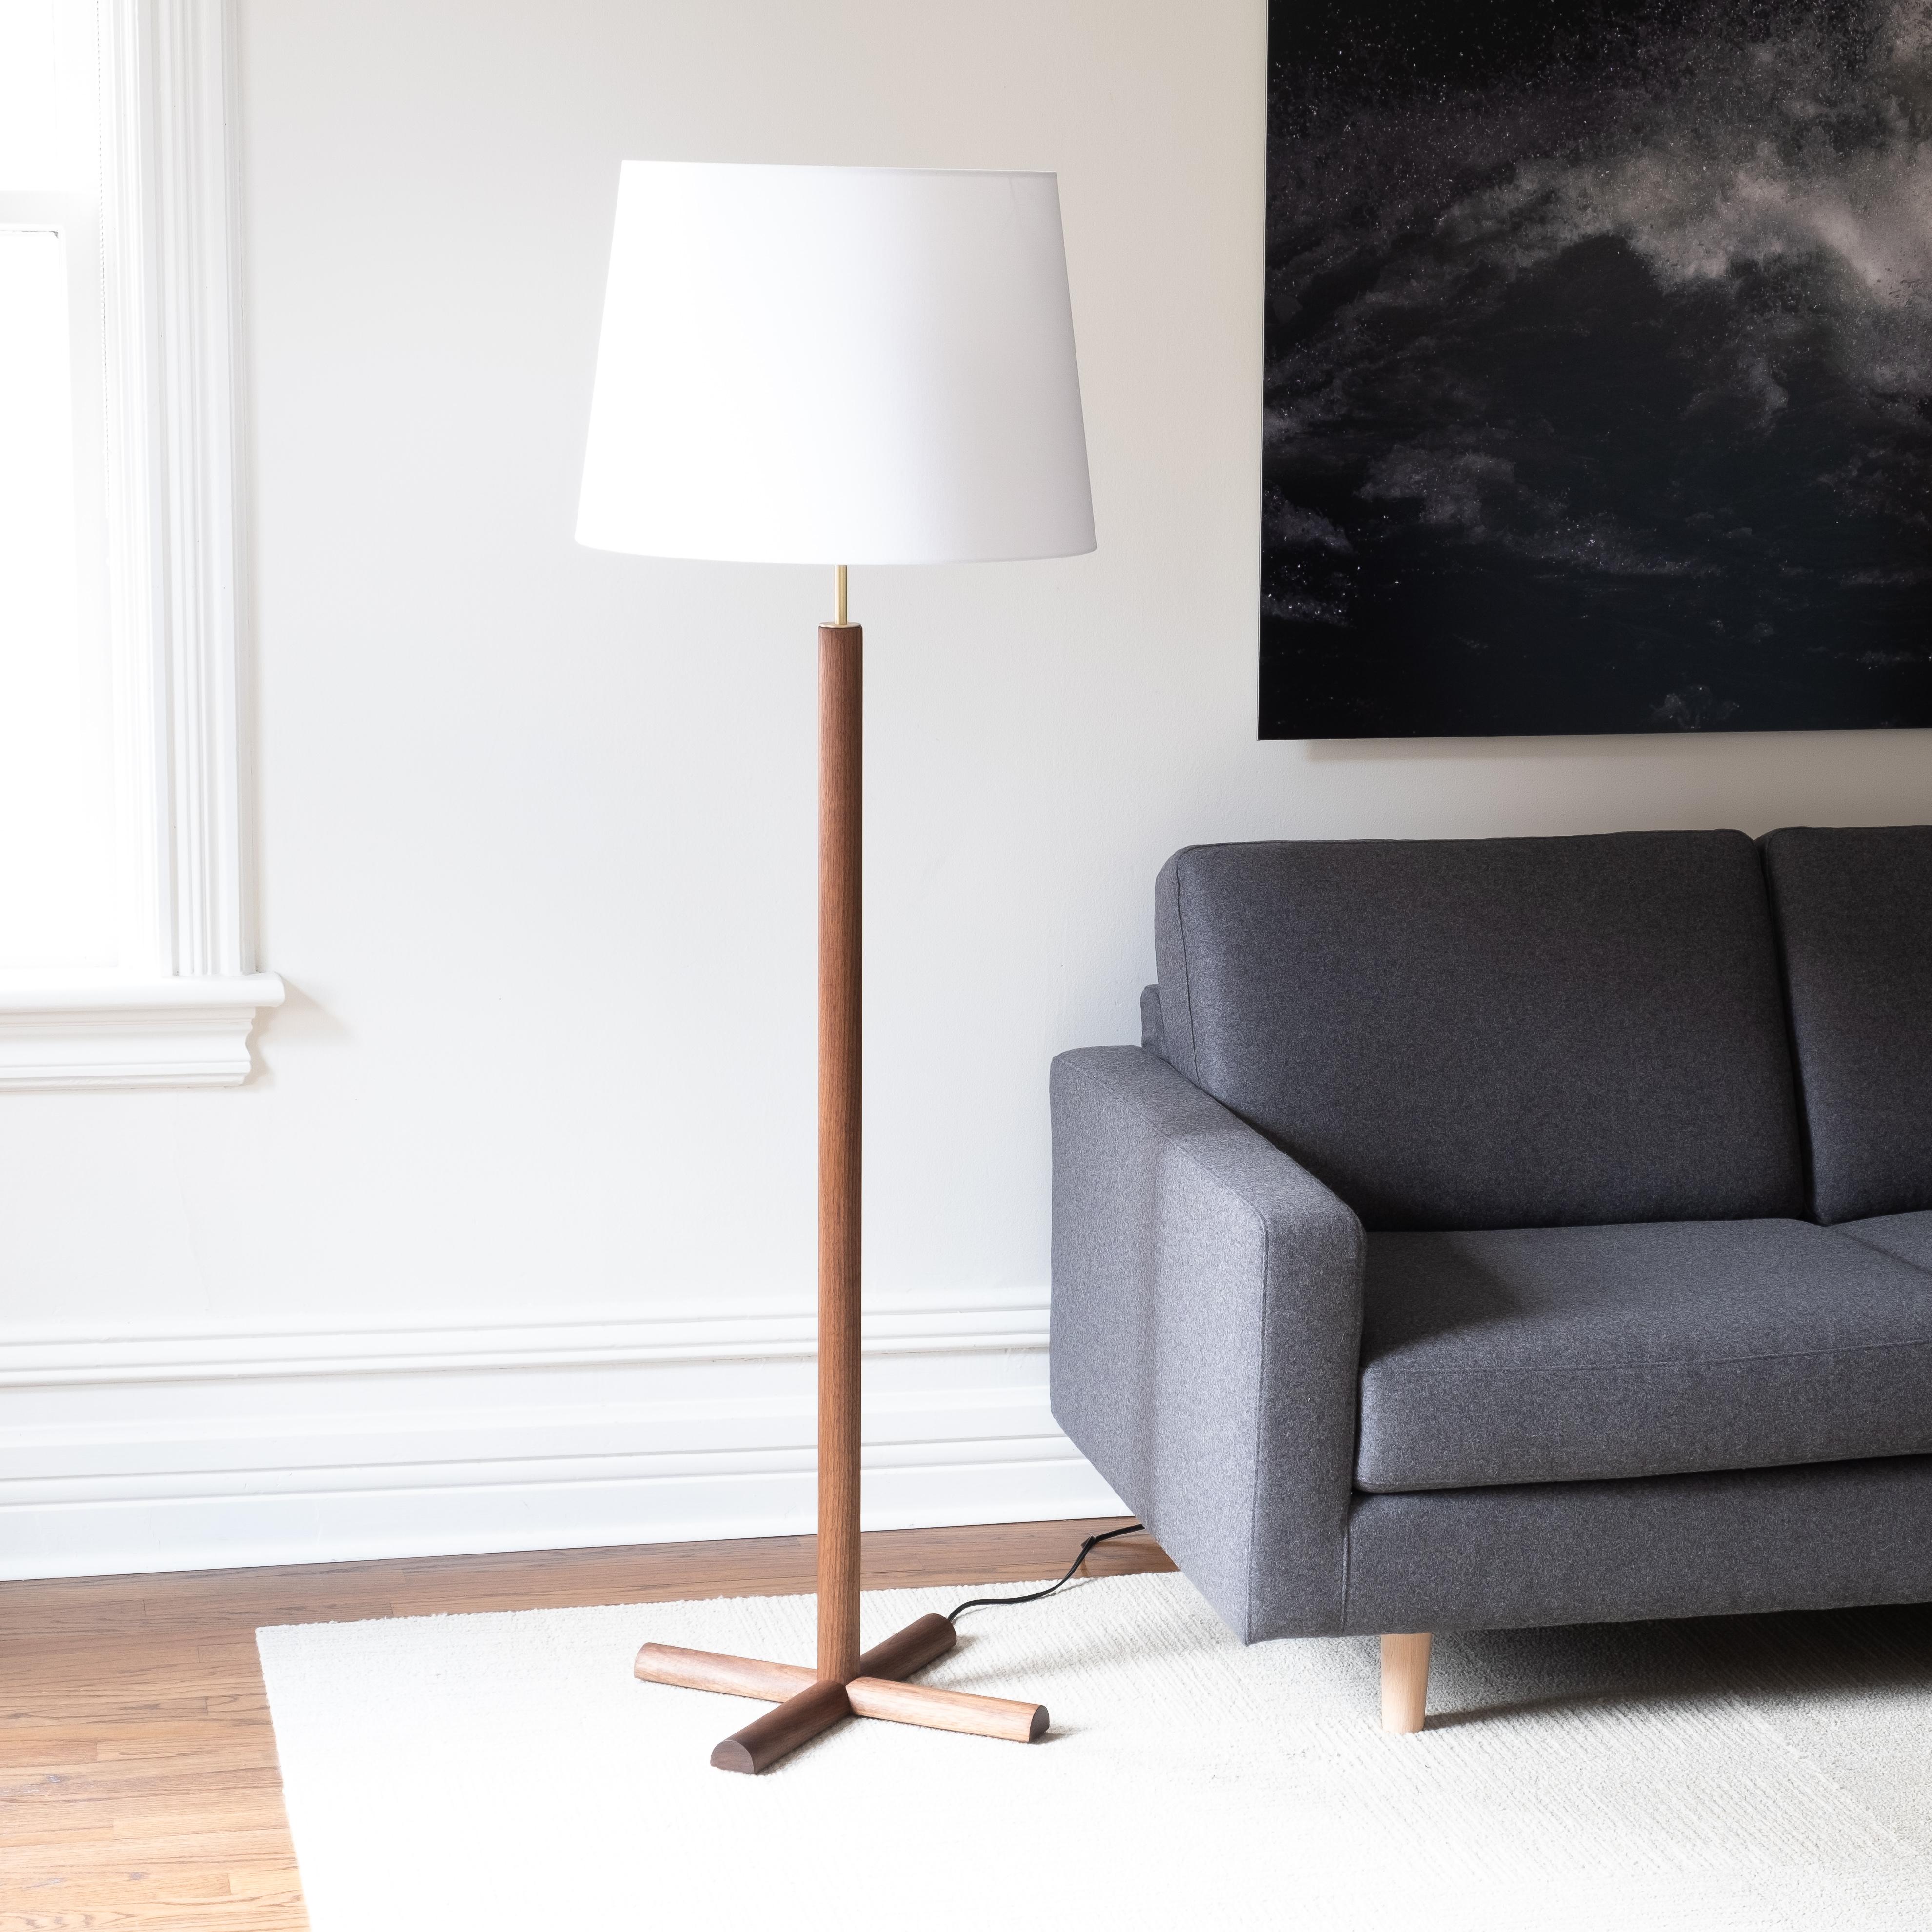 The Crux floor lamp combines minimalist forms, top-quality materials, and careful details.
The generous conical shade is supported by a clean column of turned wood, with an exposed section of brass hardware adding an elegant accent between the wood